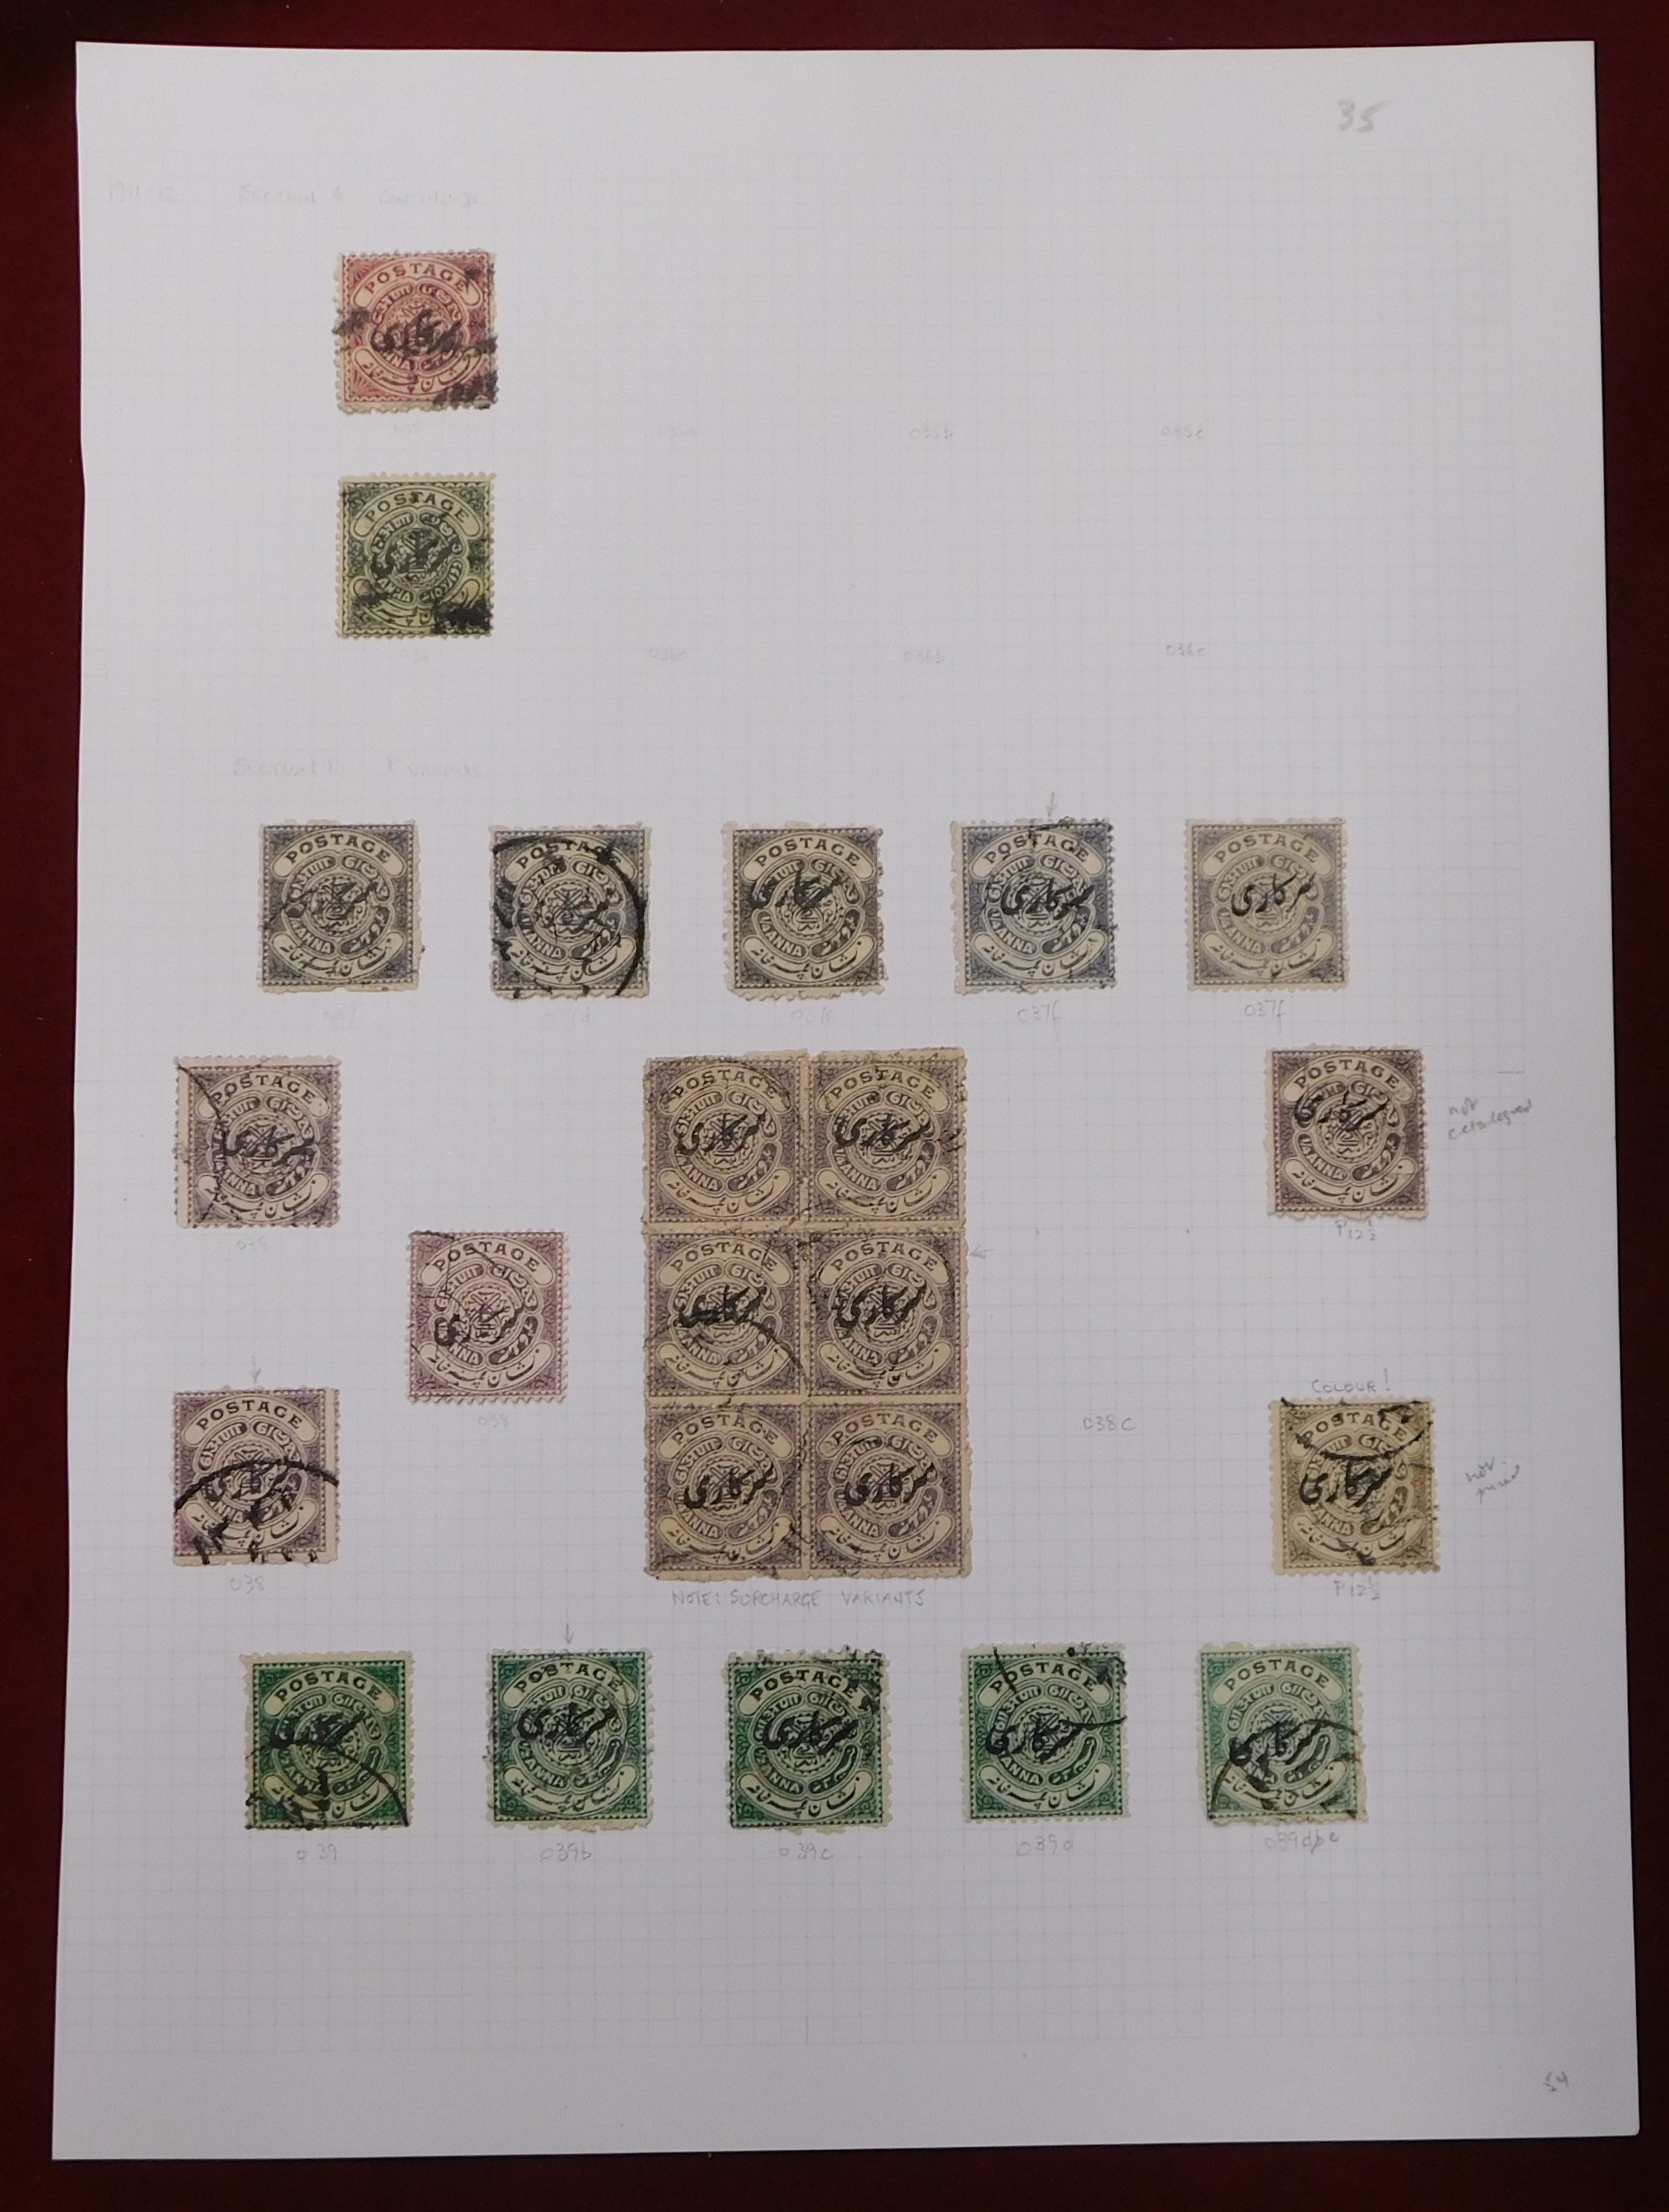 India (Hyderabad) Officials very fine used 1911-1912 035 to 039c, 038 P12.1/2 (Not catalogues) al 20